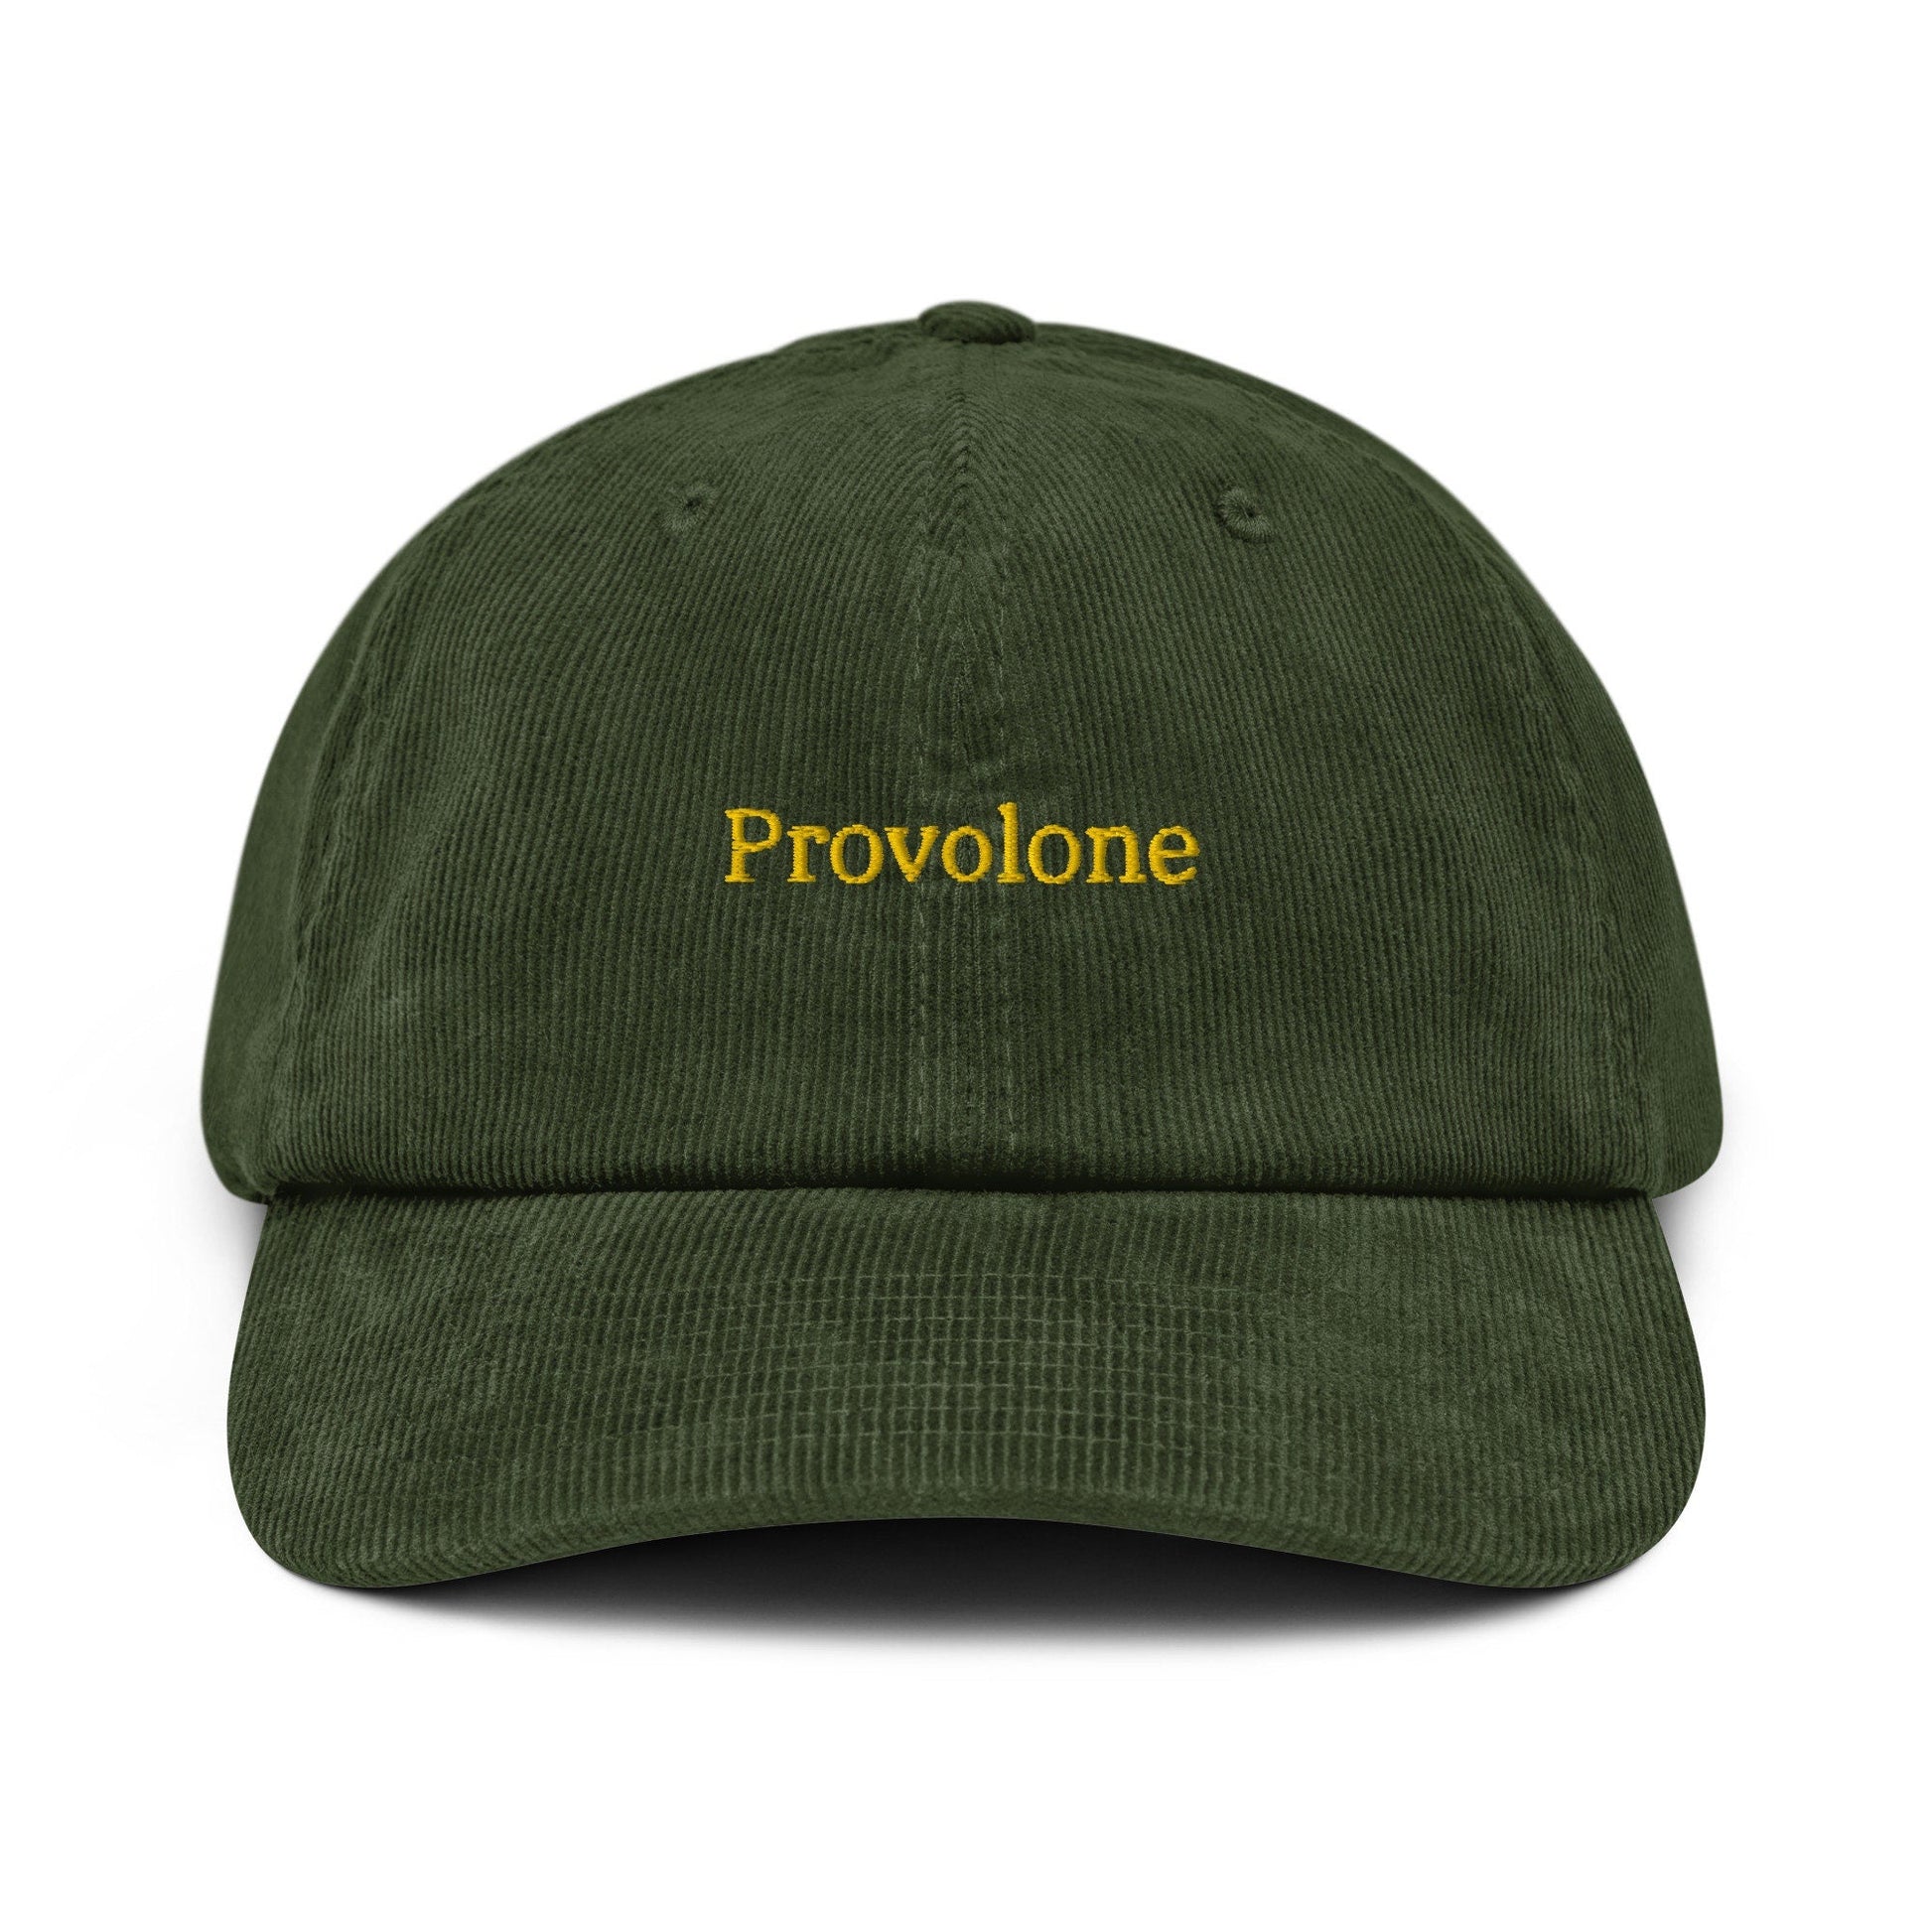 Provolone Corduroy Dad Hat - Gift for Italian charcuterie and cheese food Lovers - Handmade Embroidered Cap - Evilwater Originals